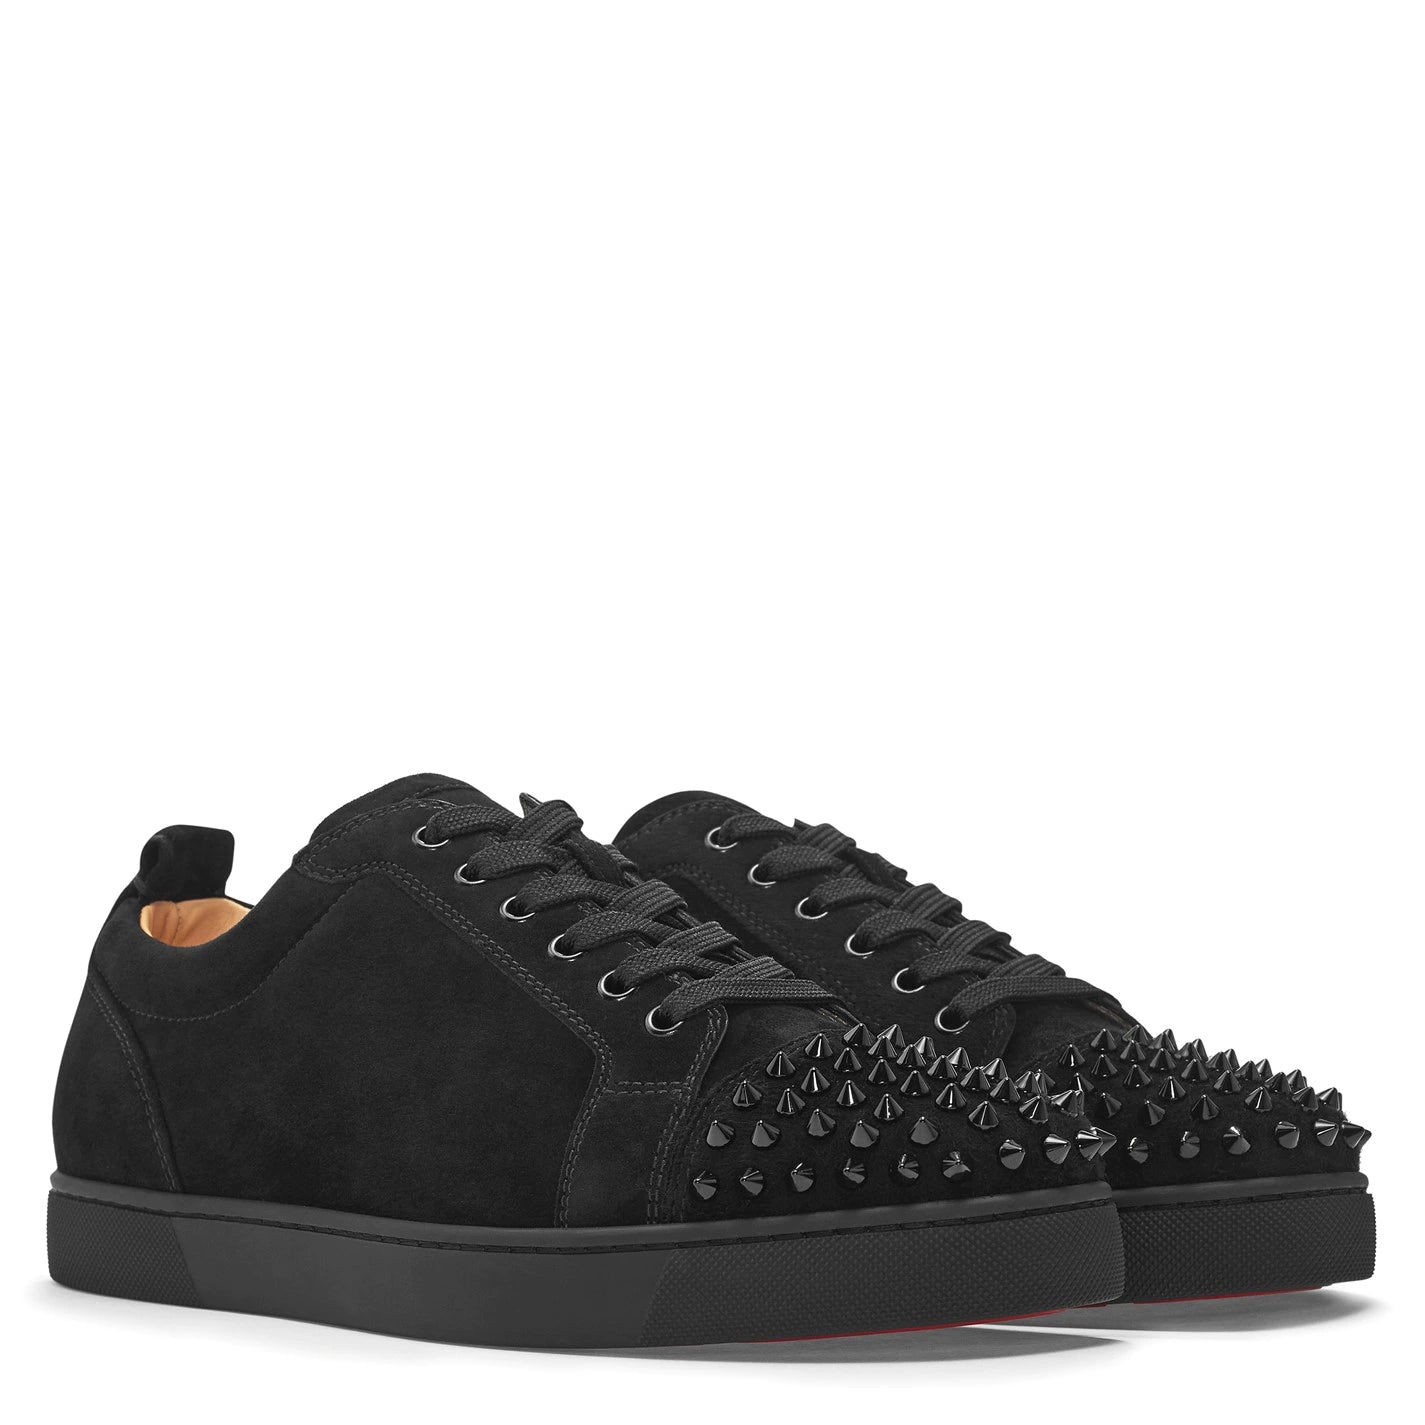 Christian Louboutin Spikes Suede Black